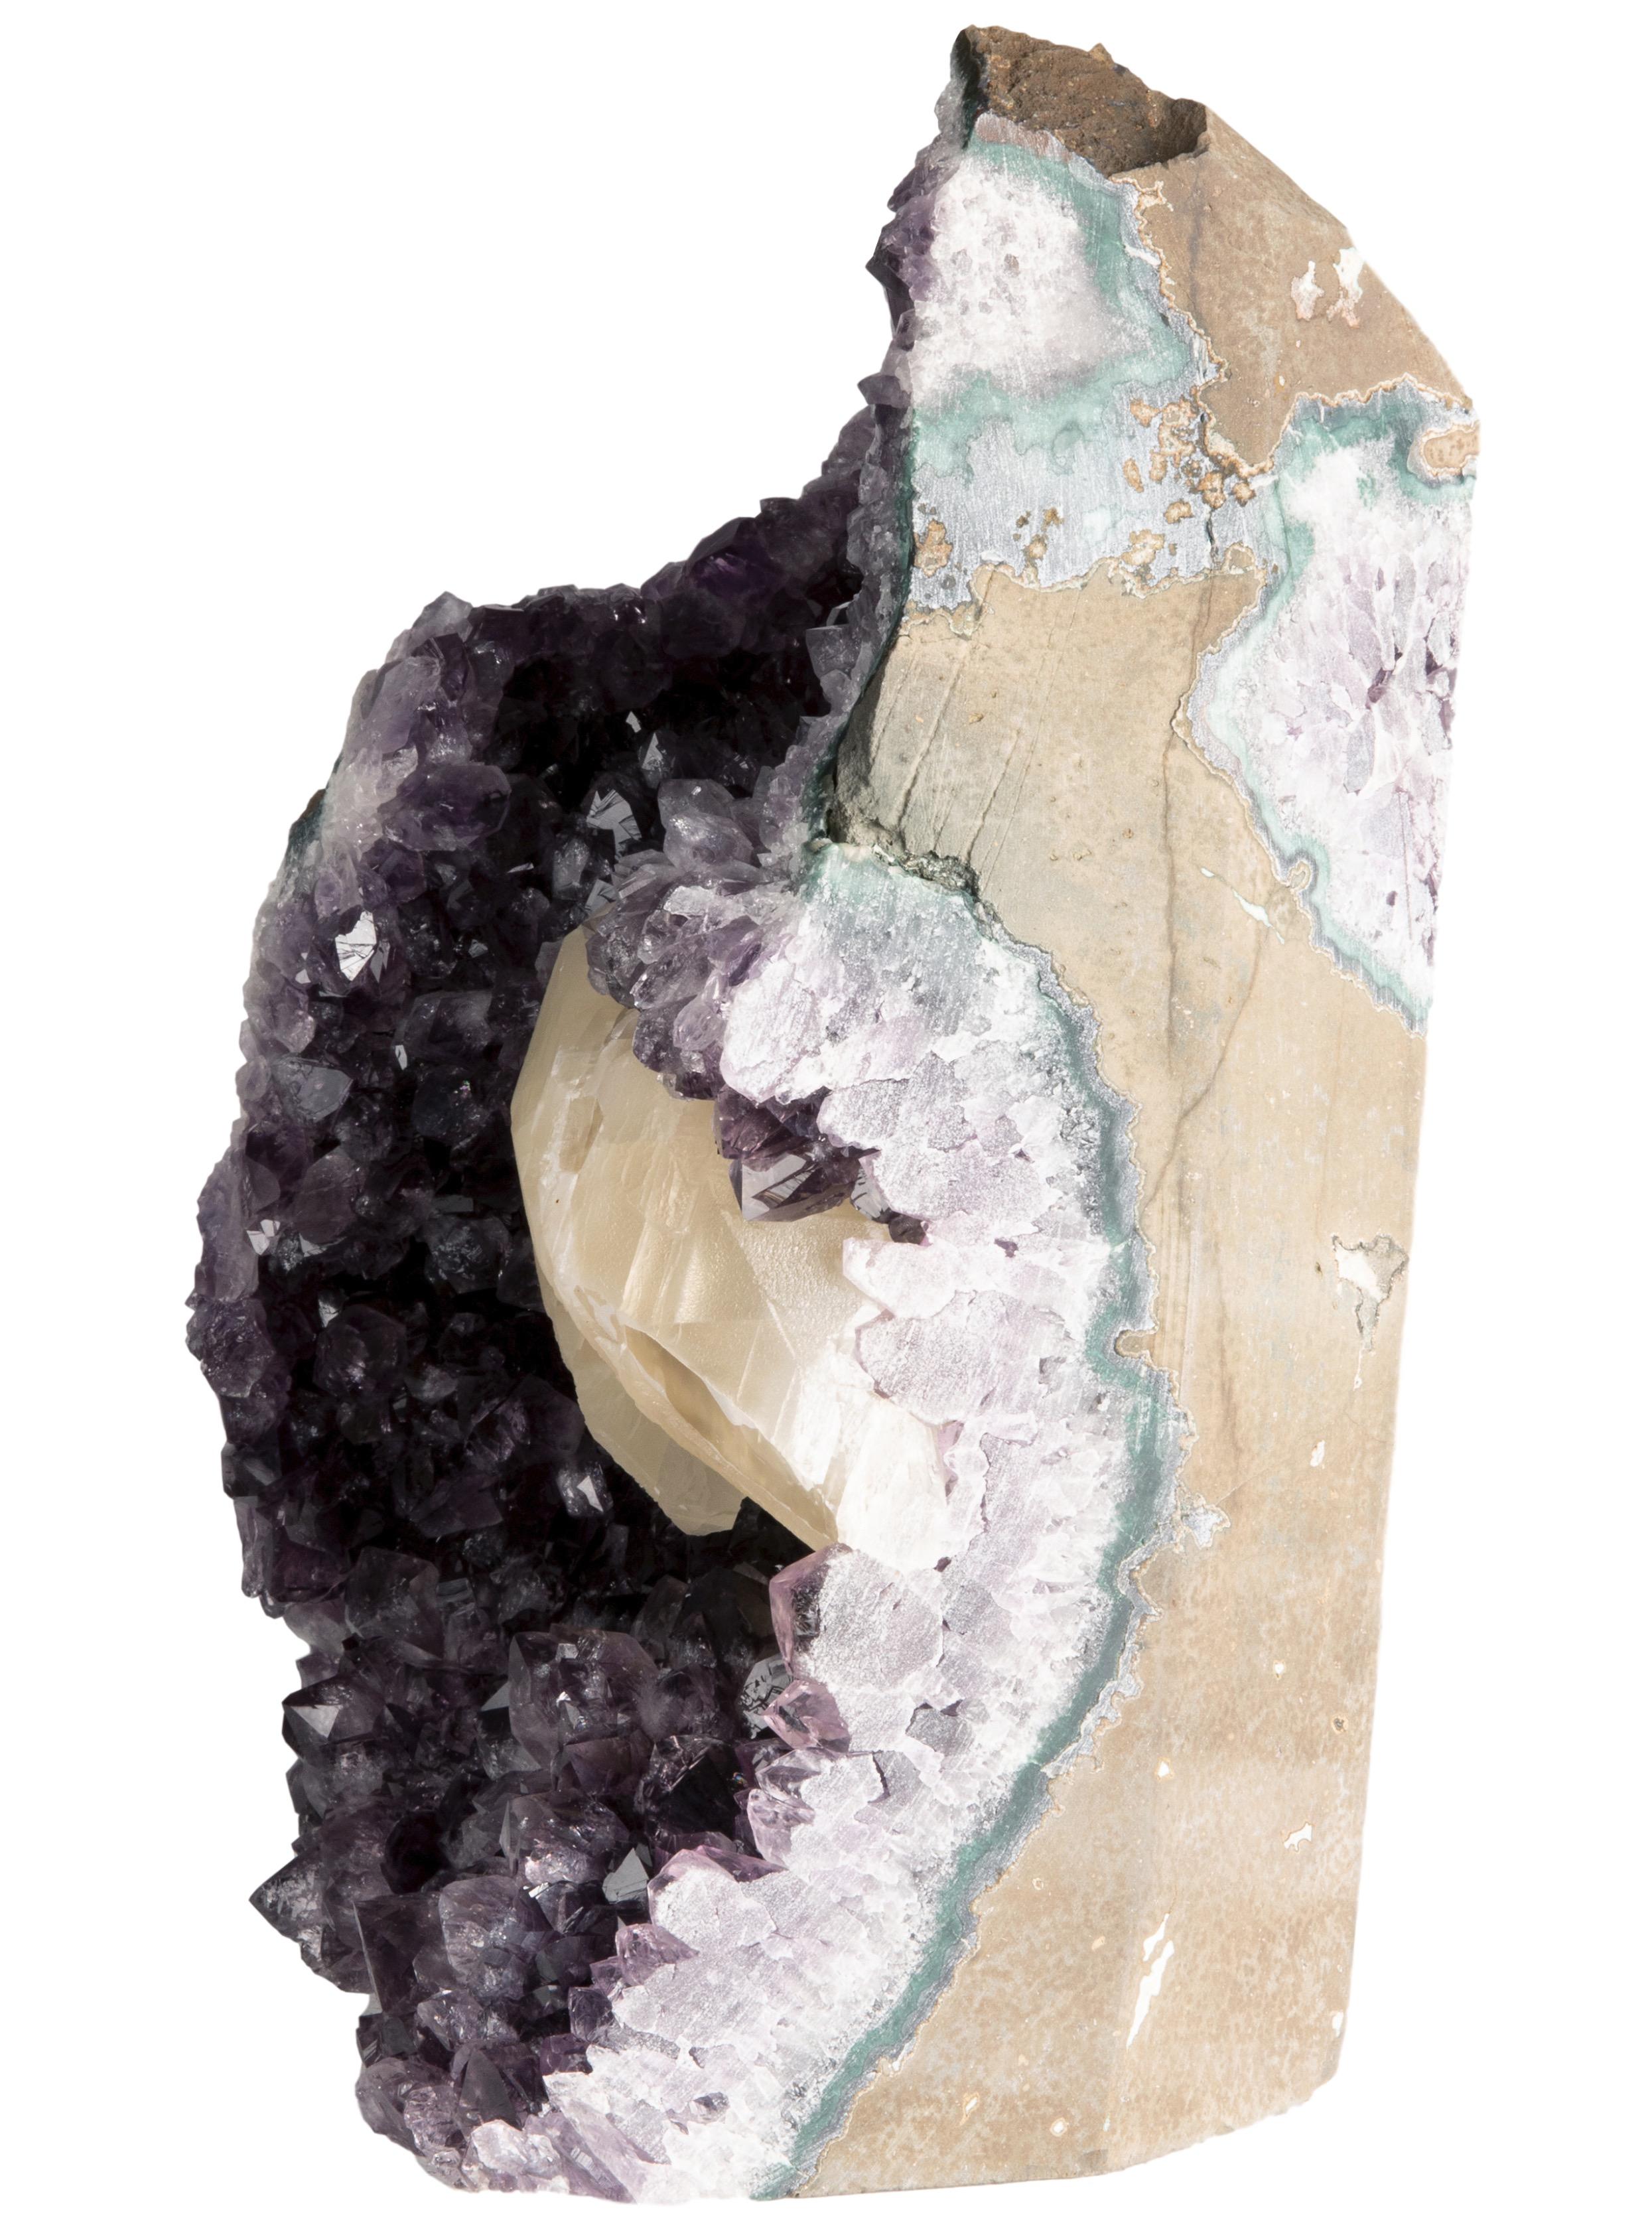 In this piece, the rough amethyst's rich purple colouration is brilliantly pierced by the matt cream calcite formation that is bordered by a green celadonite and white quartz in a manner typical of Uruguayan crystal formations, but atypical of most